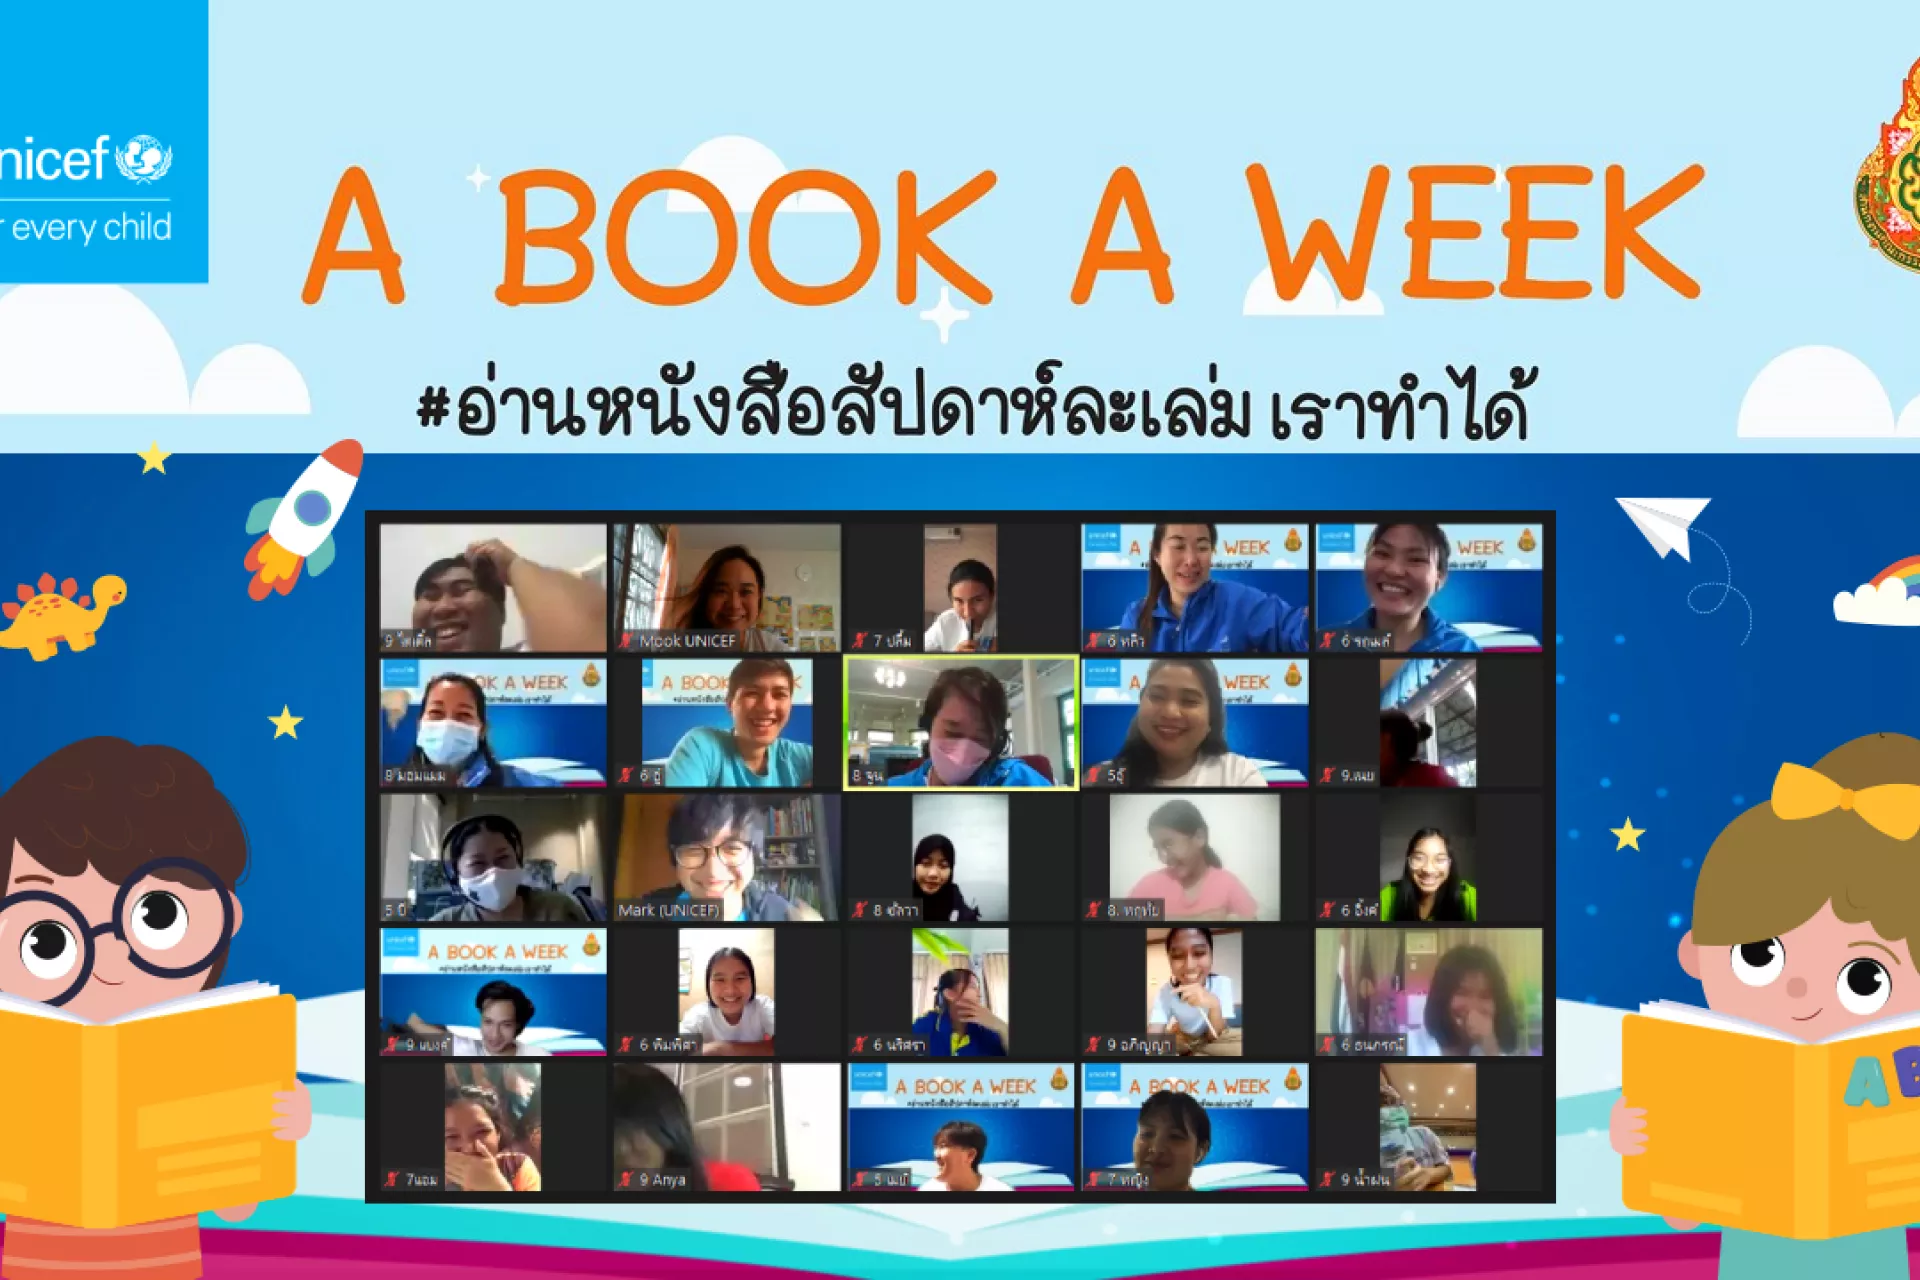 Key visual for UNICEF's A Book A Week campaign